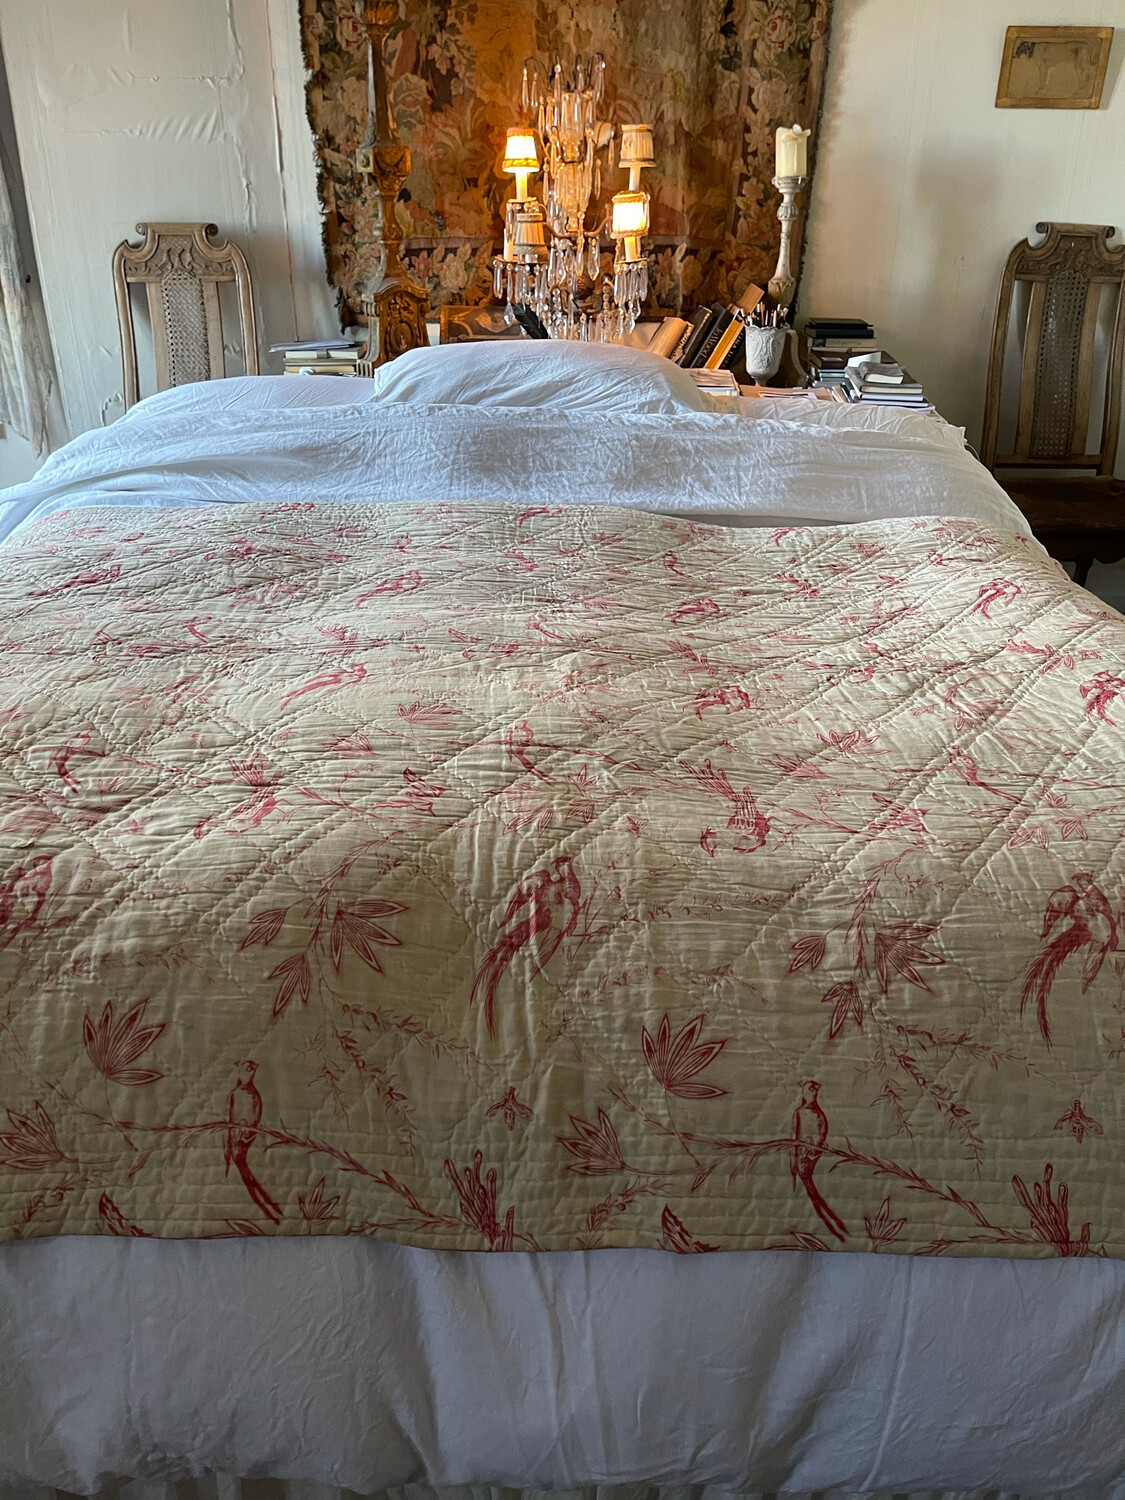 Antique French 19thc Handmade Quilt Depicting Birds Beautiful Condition Circa 1820